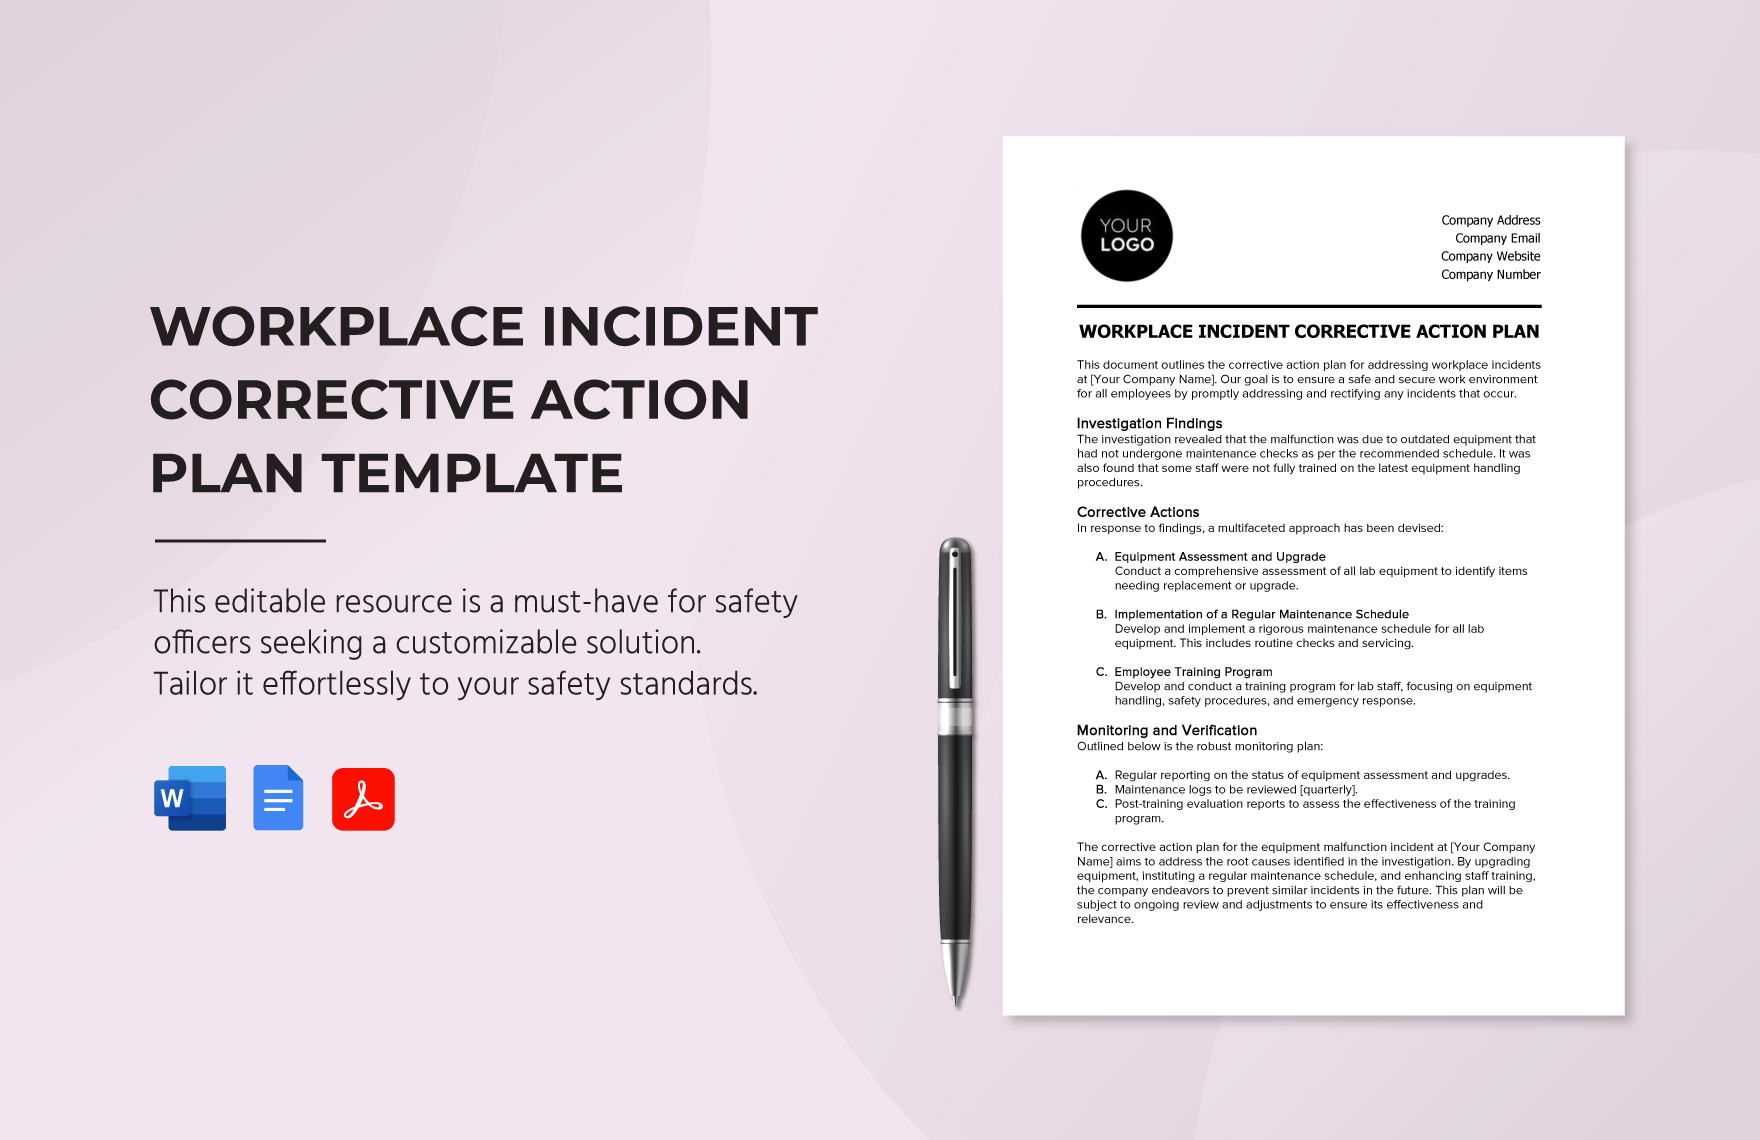 Workplace Incident Corrective Action Plan Template